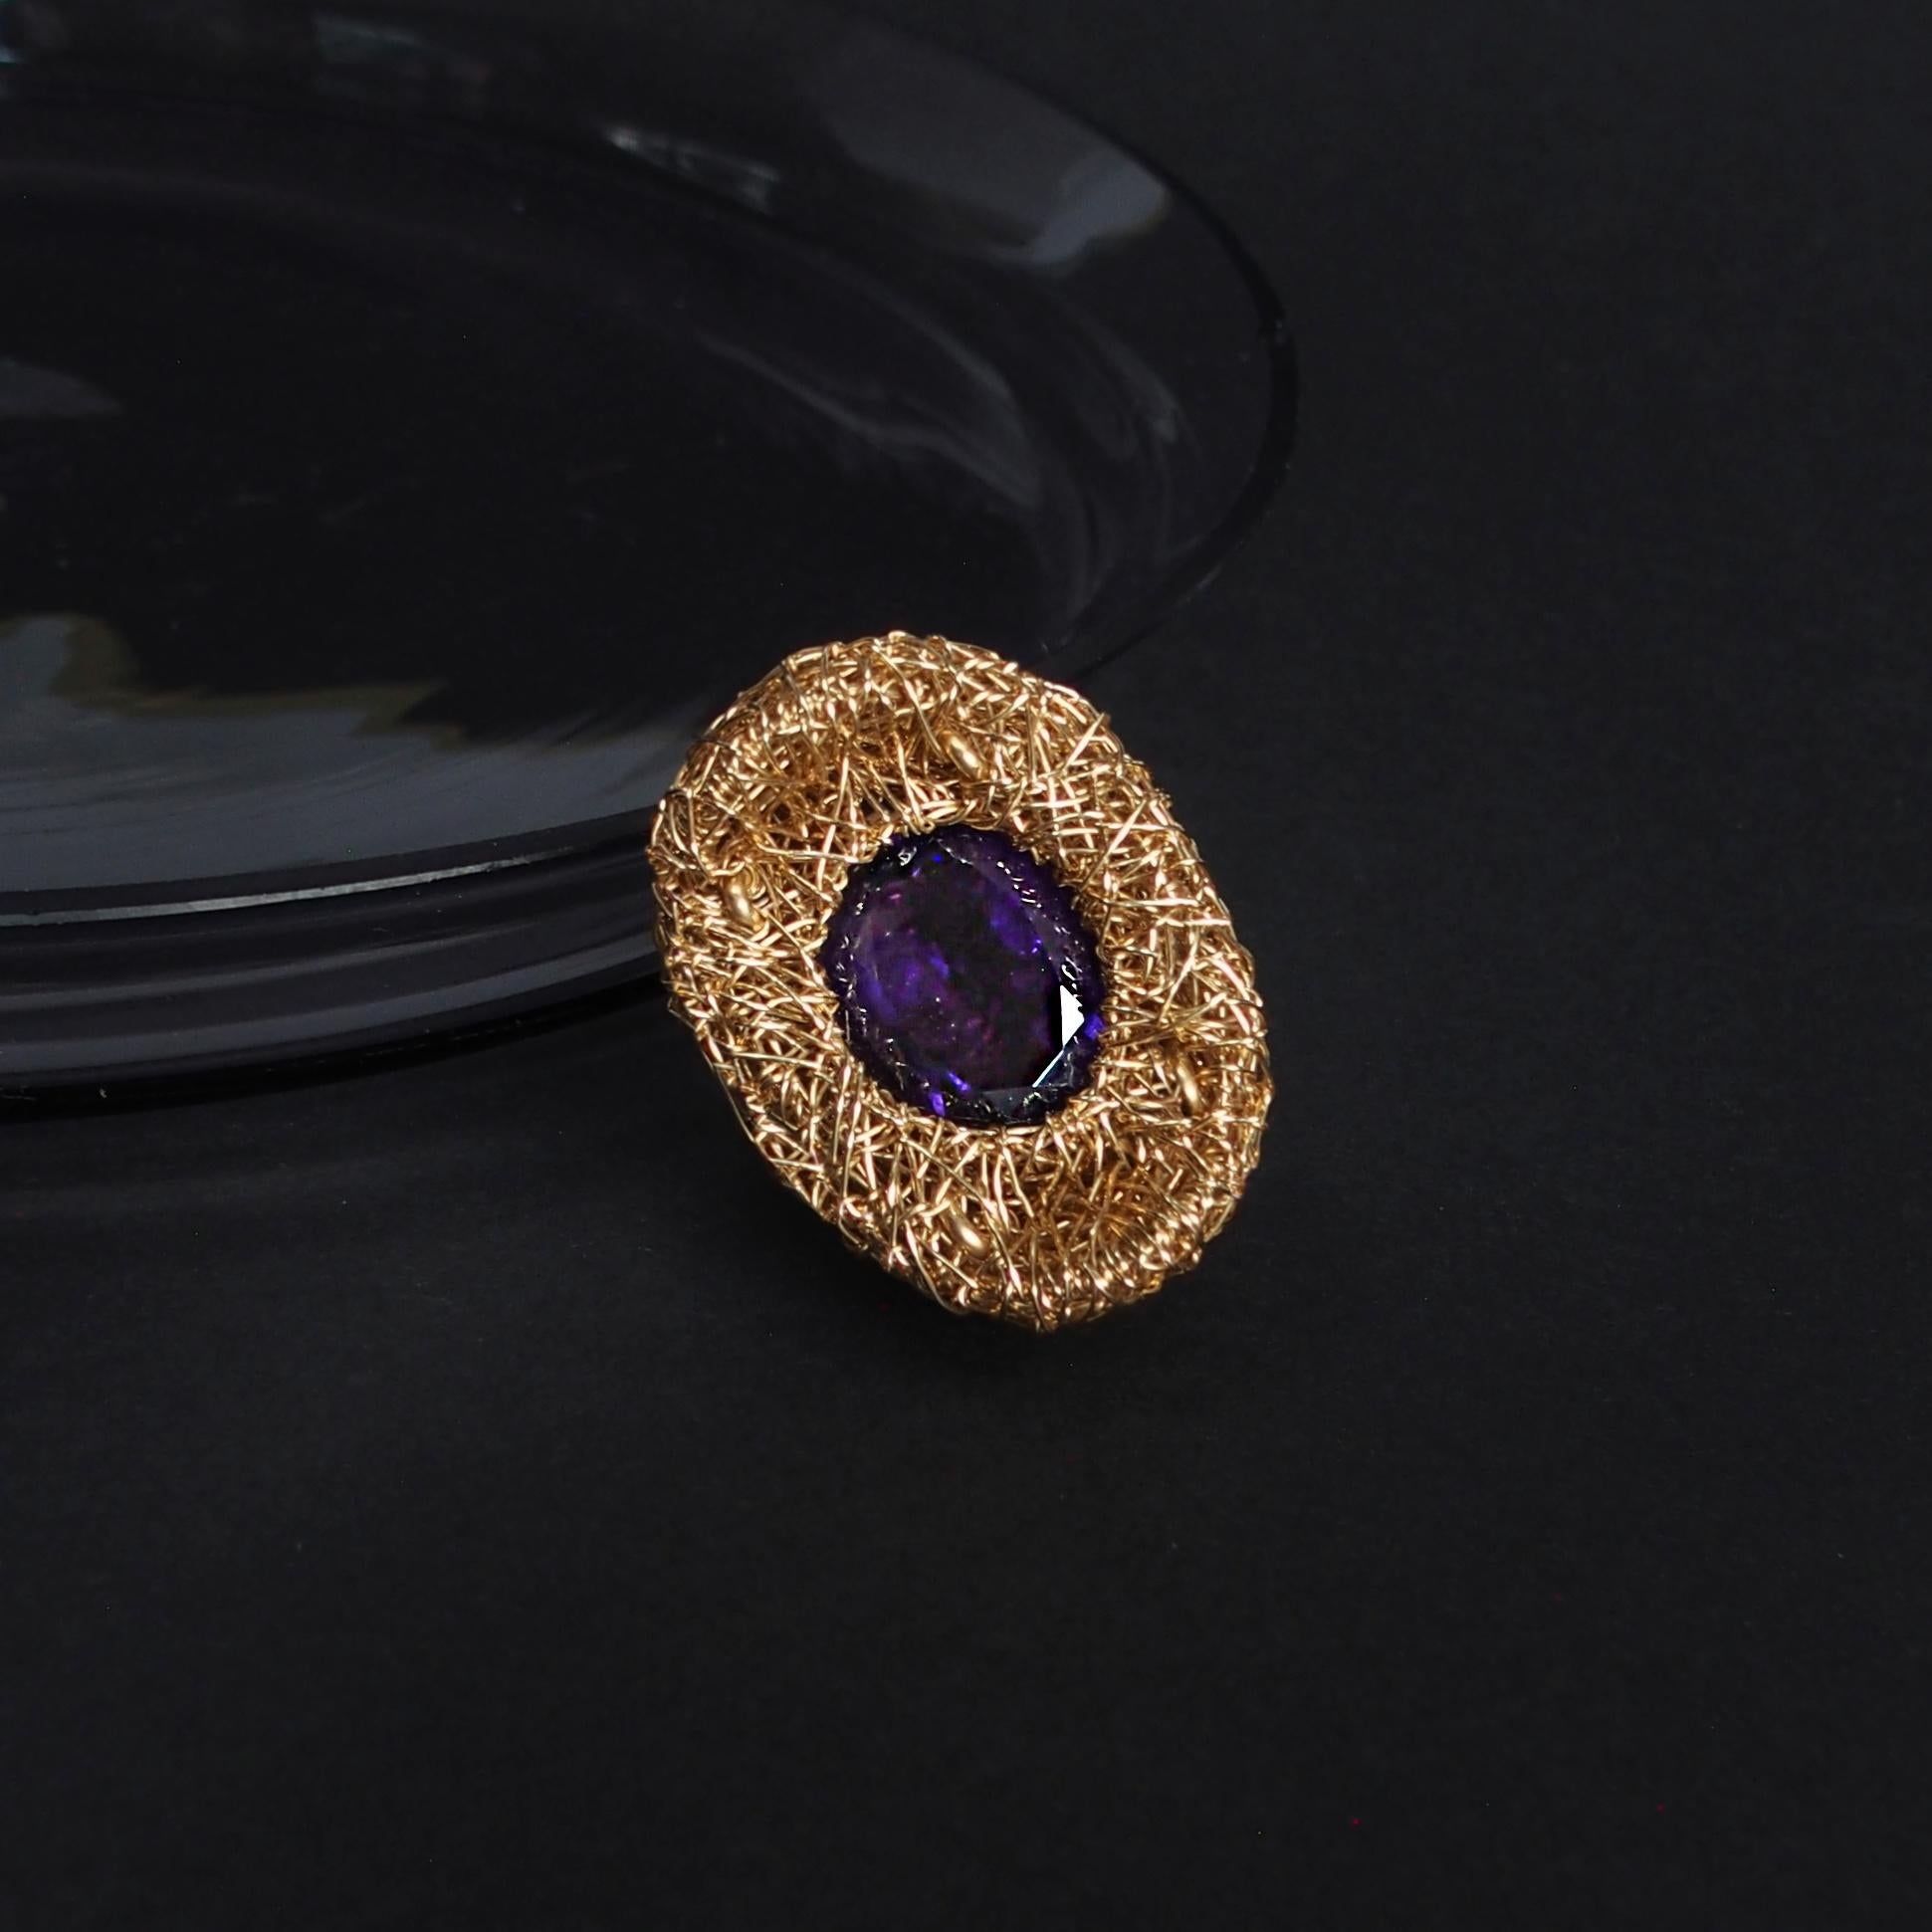 Contemporary Purple Faceted Oval Amethyst 14kt Gold F Cocktail Statement Ring by the Artist